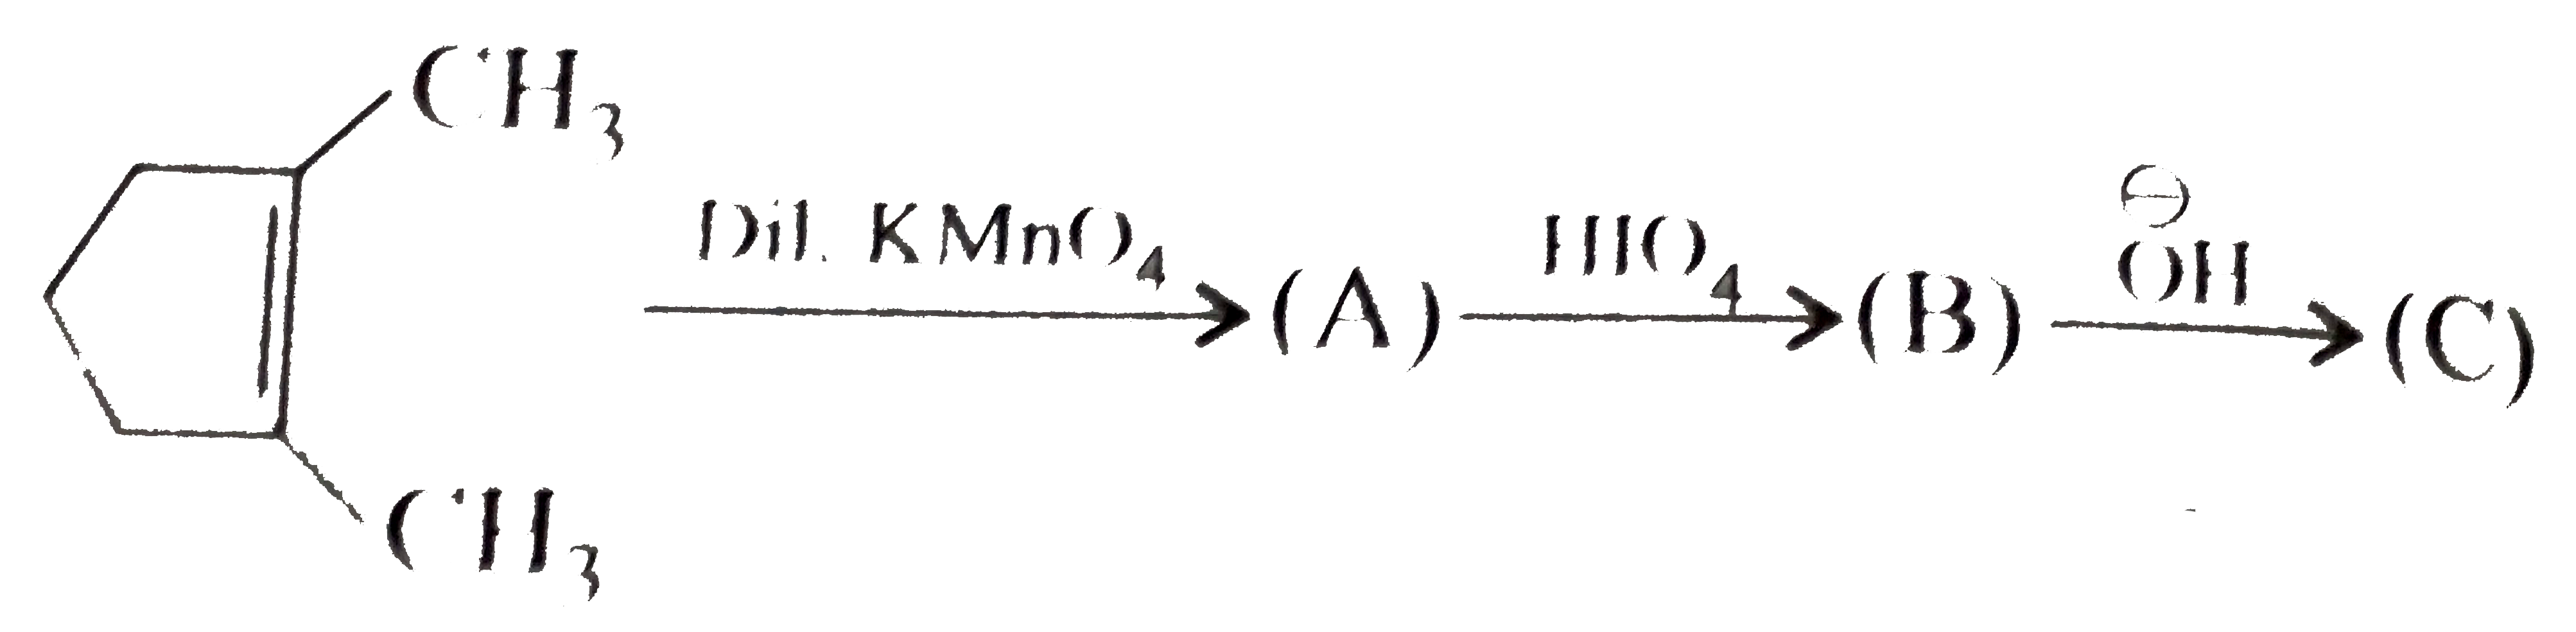 Suggest appropriate structure of compound (A)  (The number of carbon atoms remains the same throughout the reaction.)